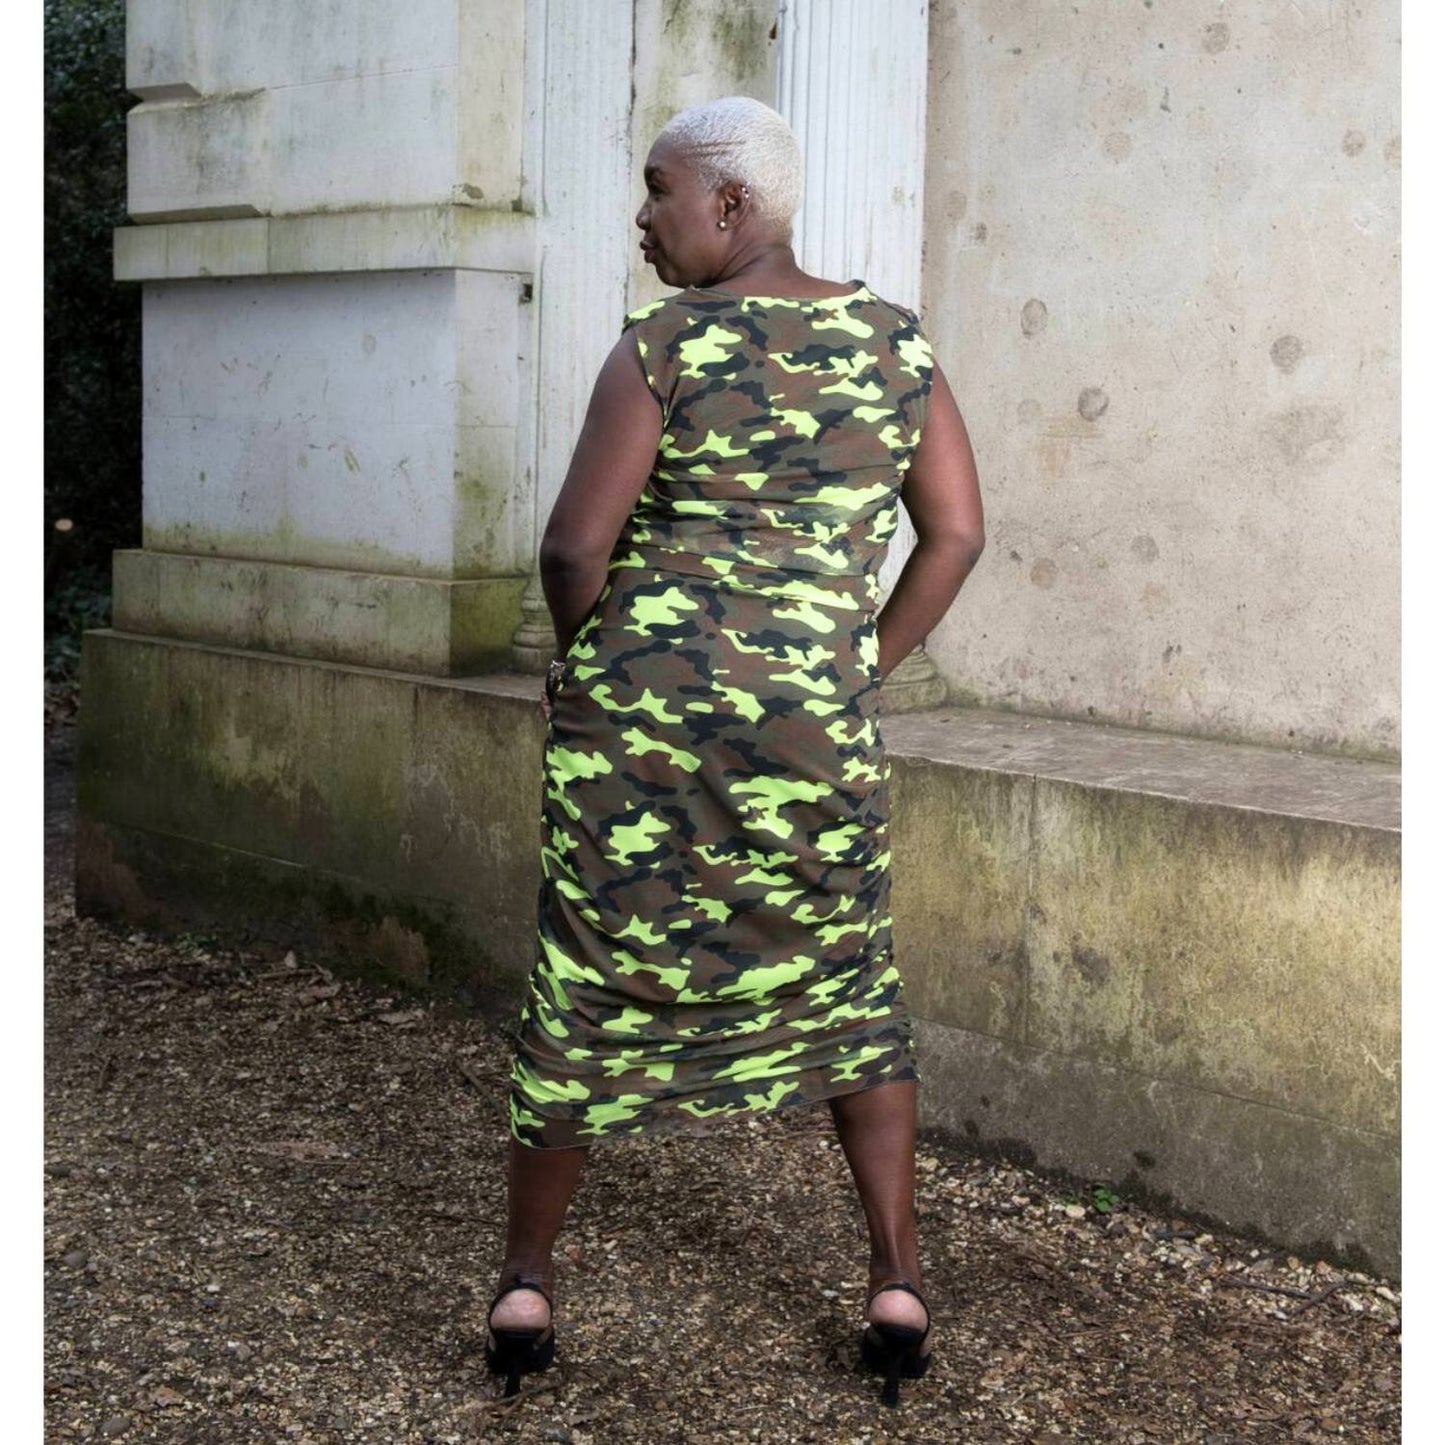 Women's Summer Plus Size Neon Lime Black Brown Camouflage Bodycon Midi Dress shown from the back, styled with black heels for a bold, chic look.